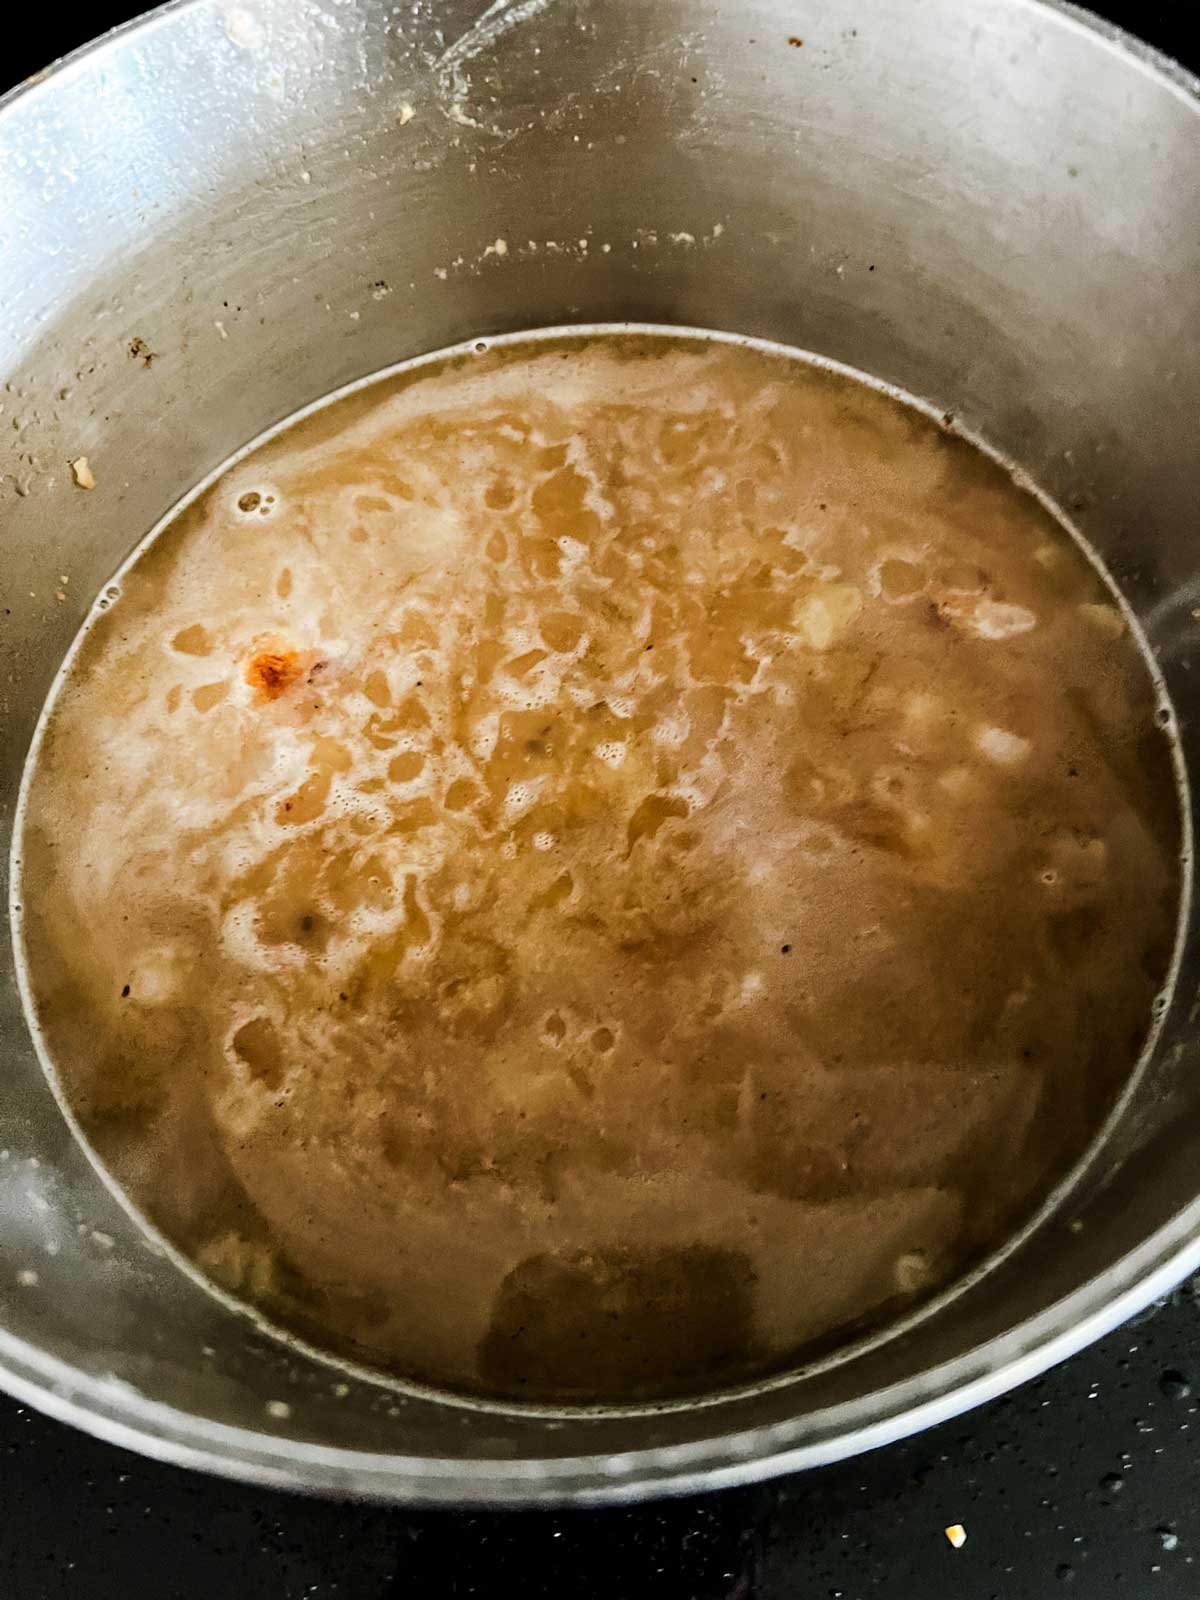 Broth added to butter, onion, and flour in a pan.